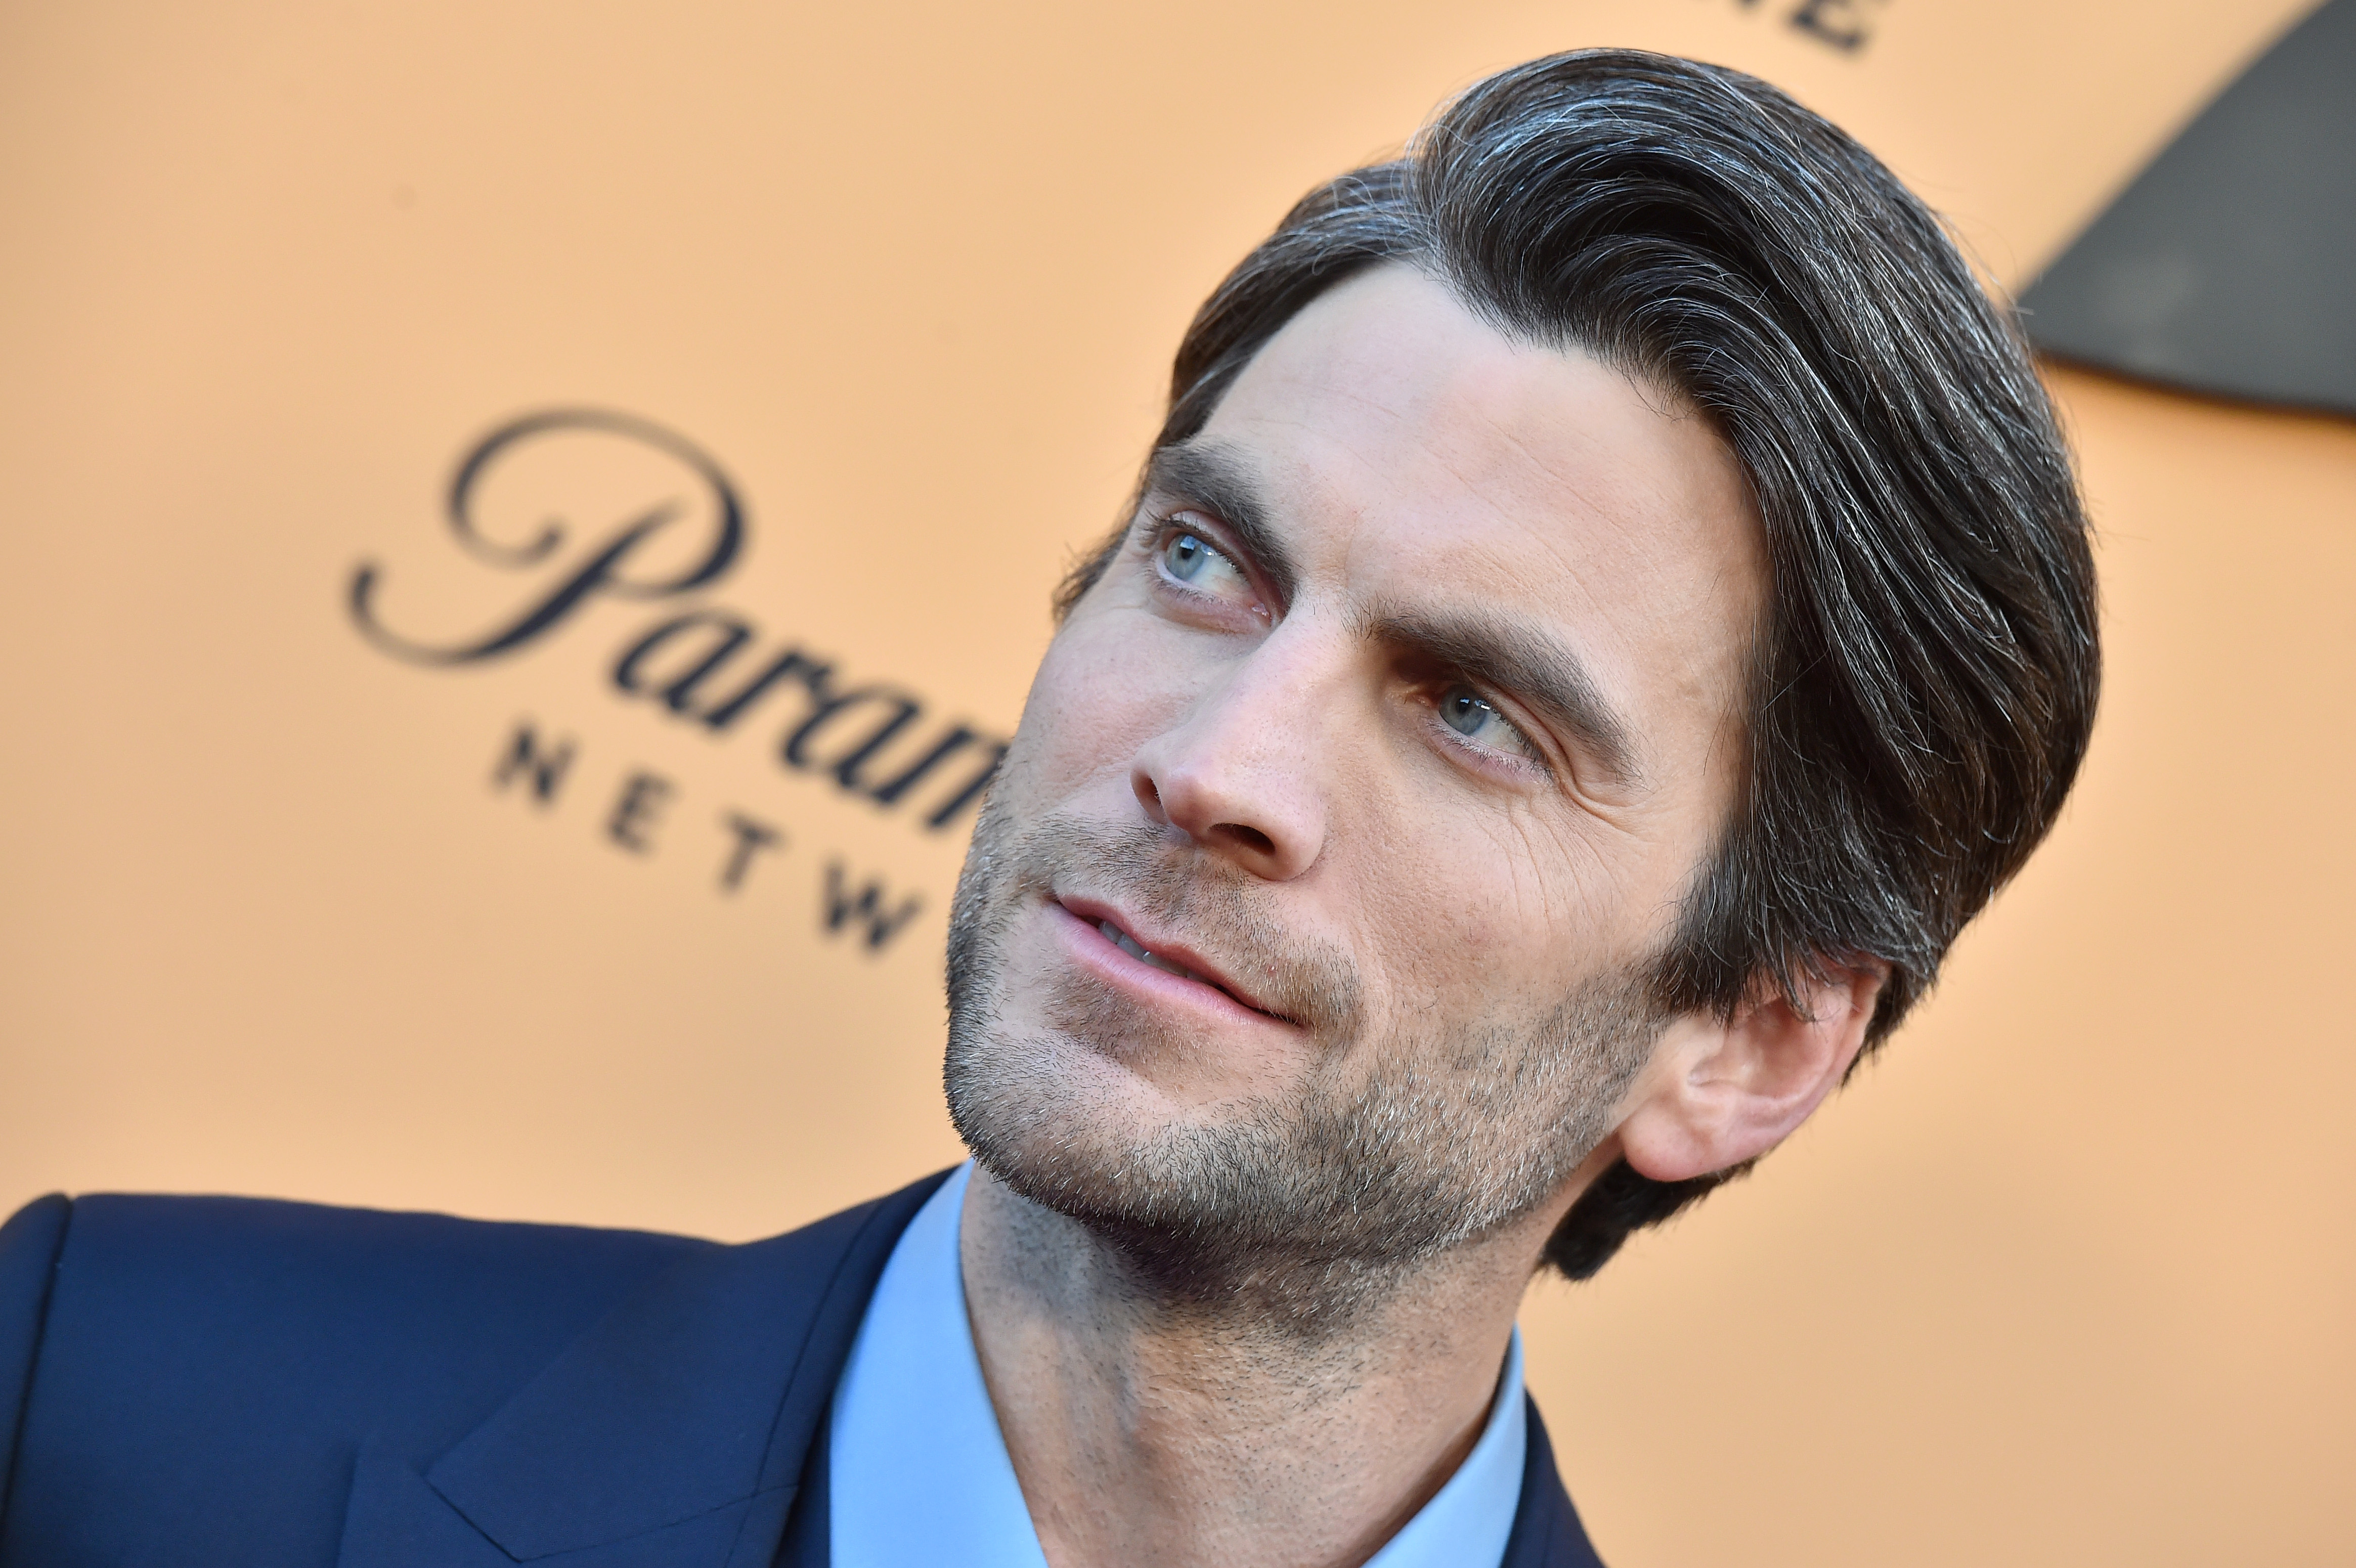 Wes Bentley attends the premiere party for Paramount Network's "Yellowstone" Season 2 at Lombardi House on May 30, 2019